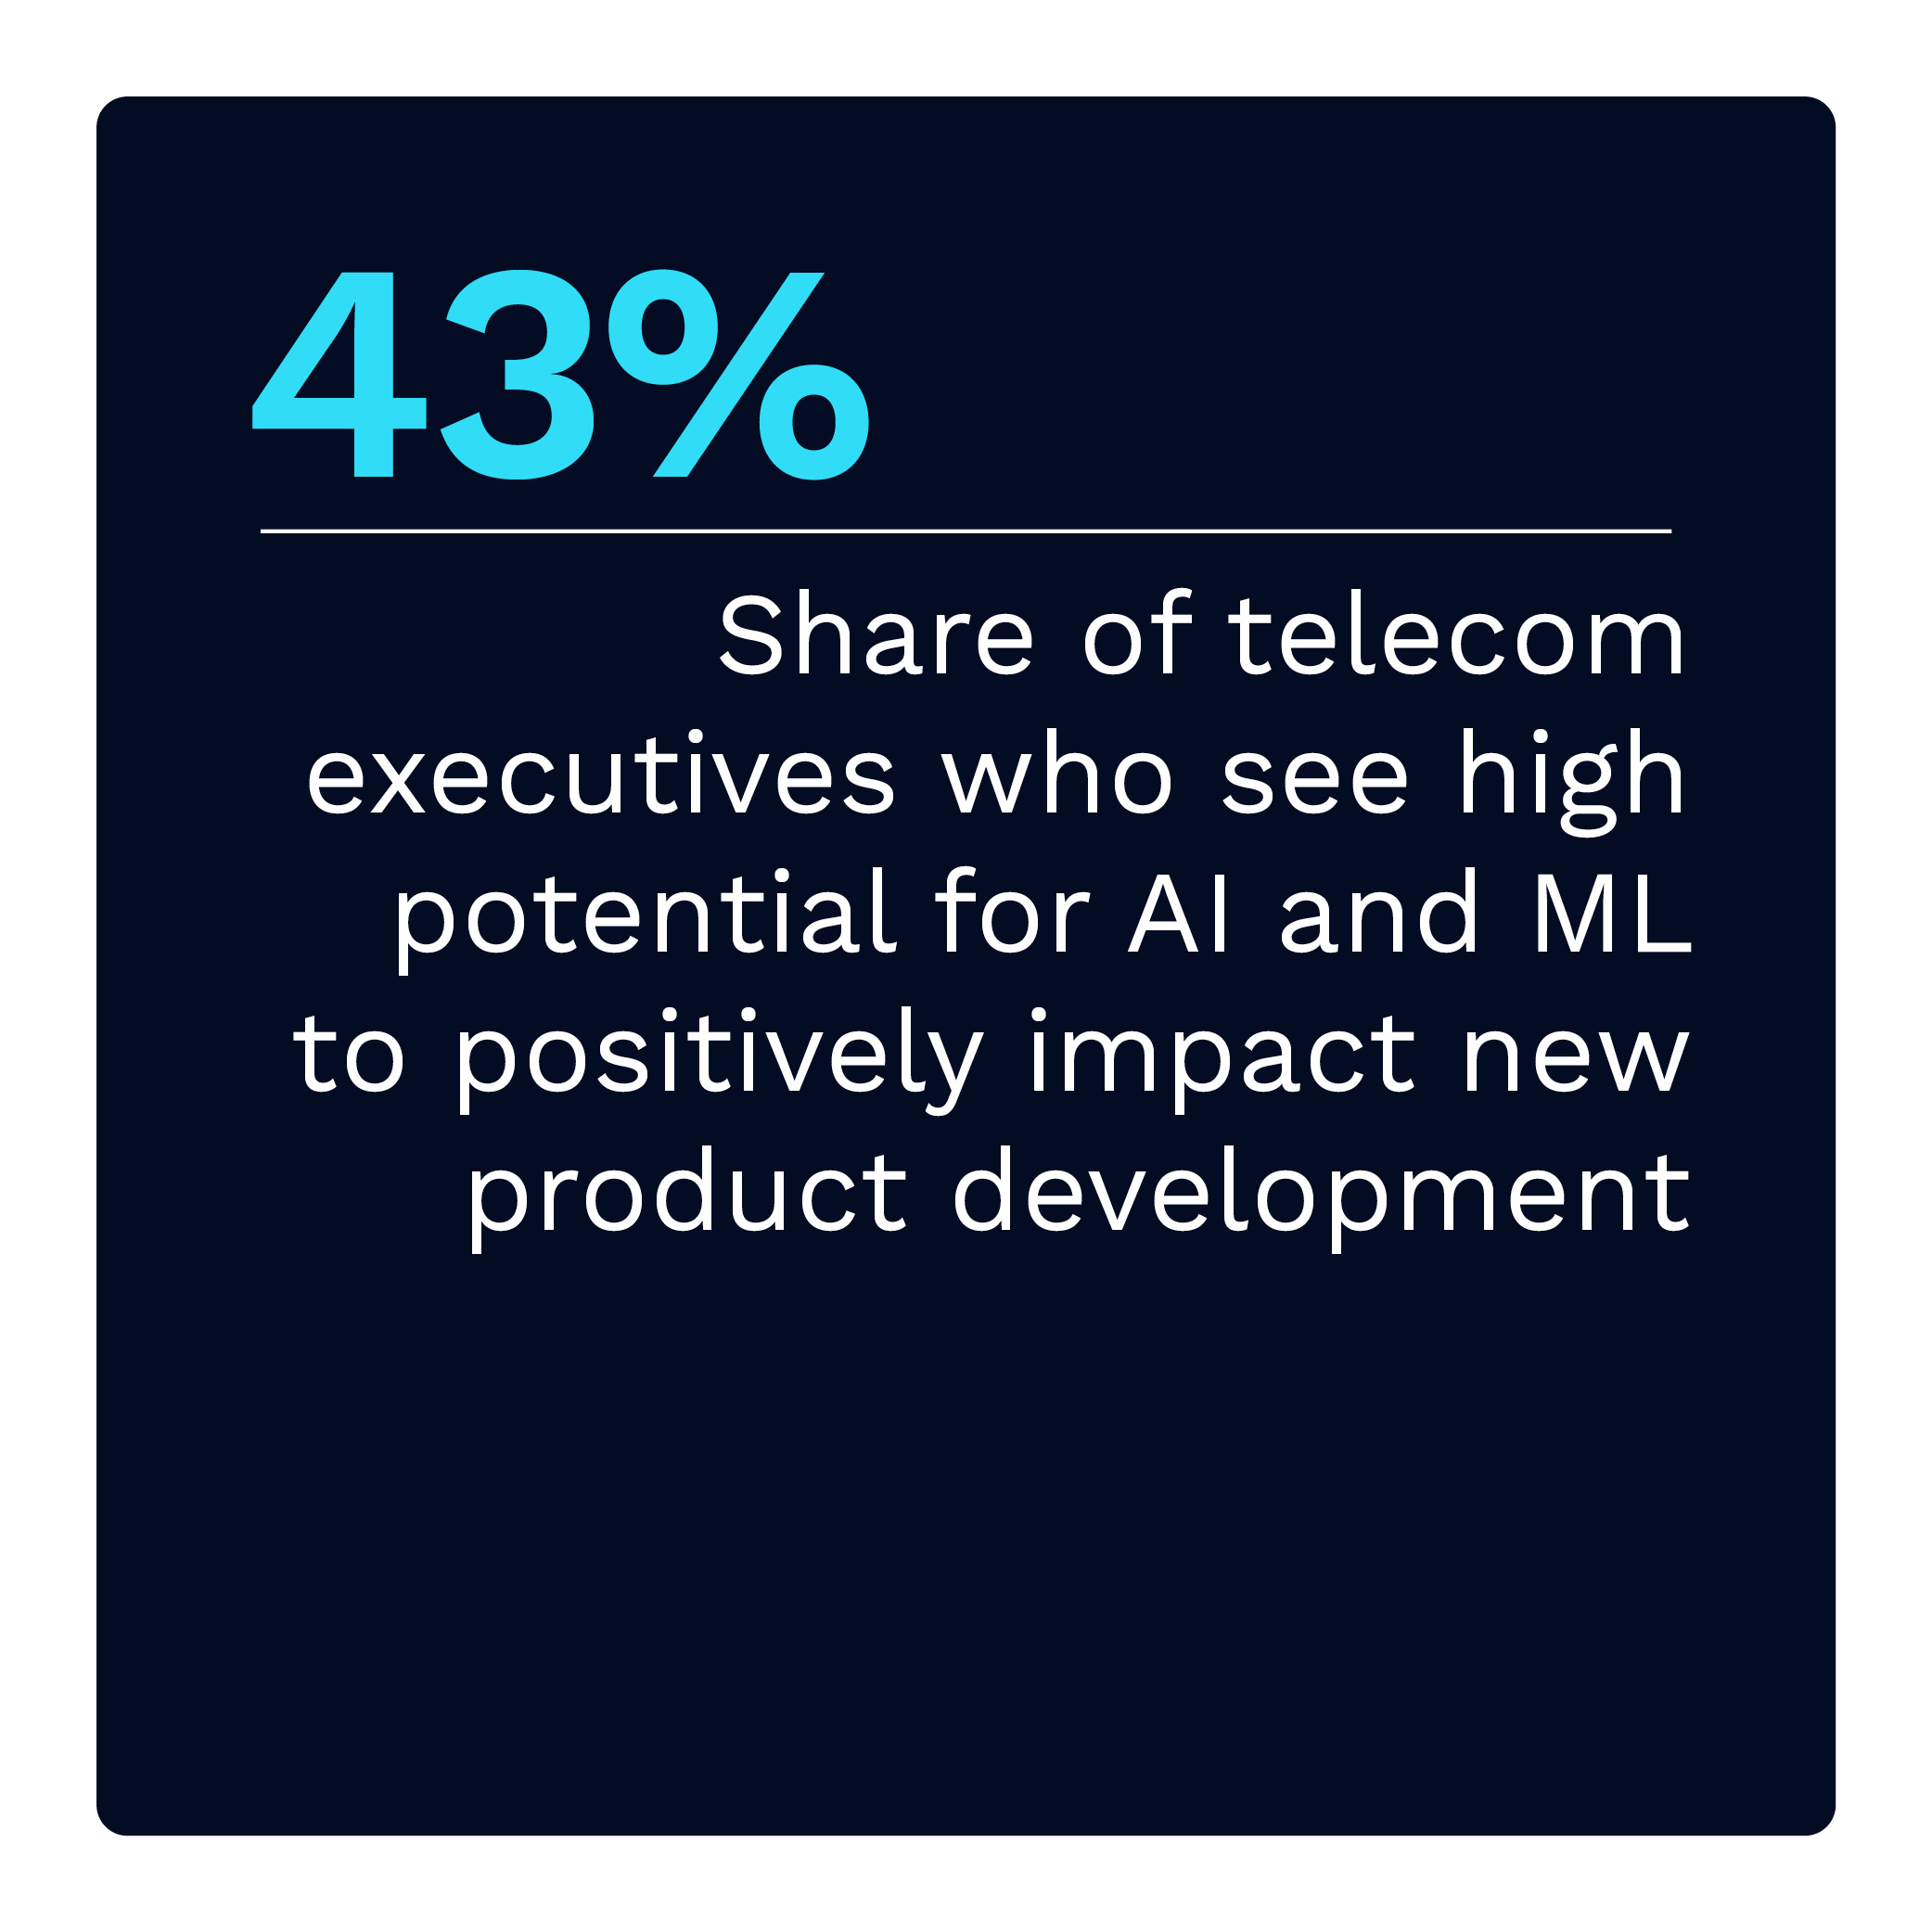 43%: Share of telecom executives who see high potential for AI and ML to positively impact new product development